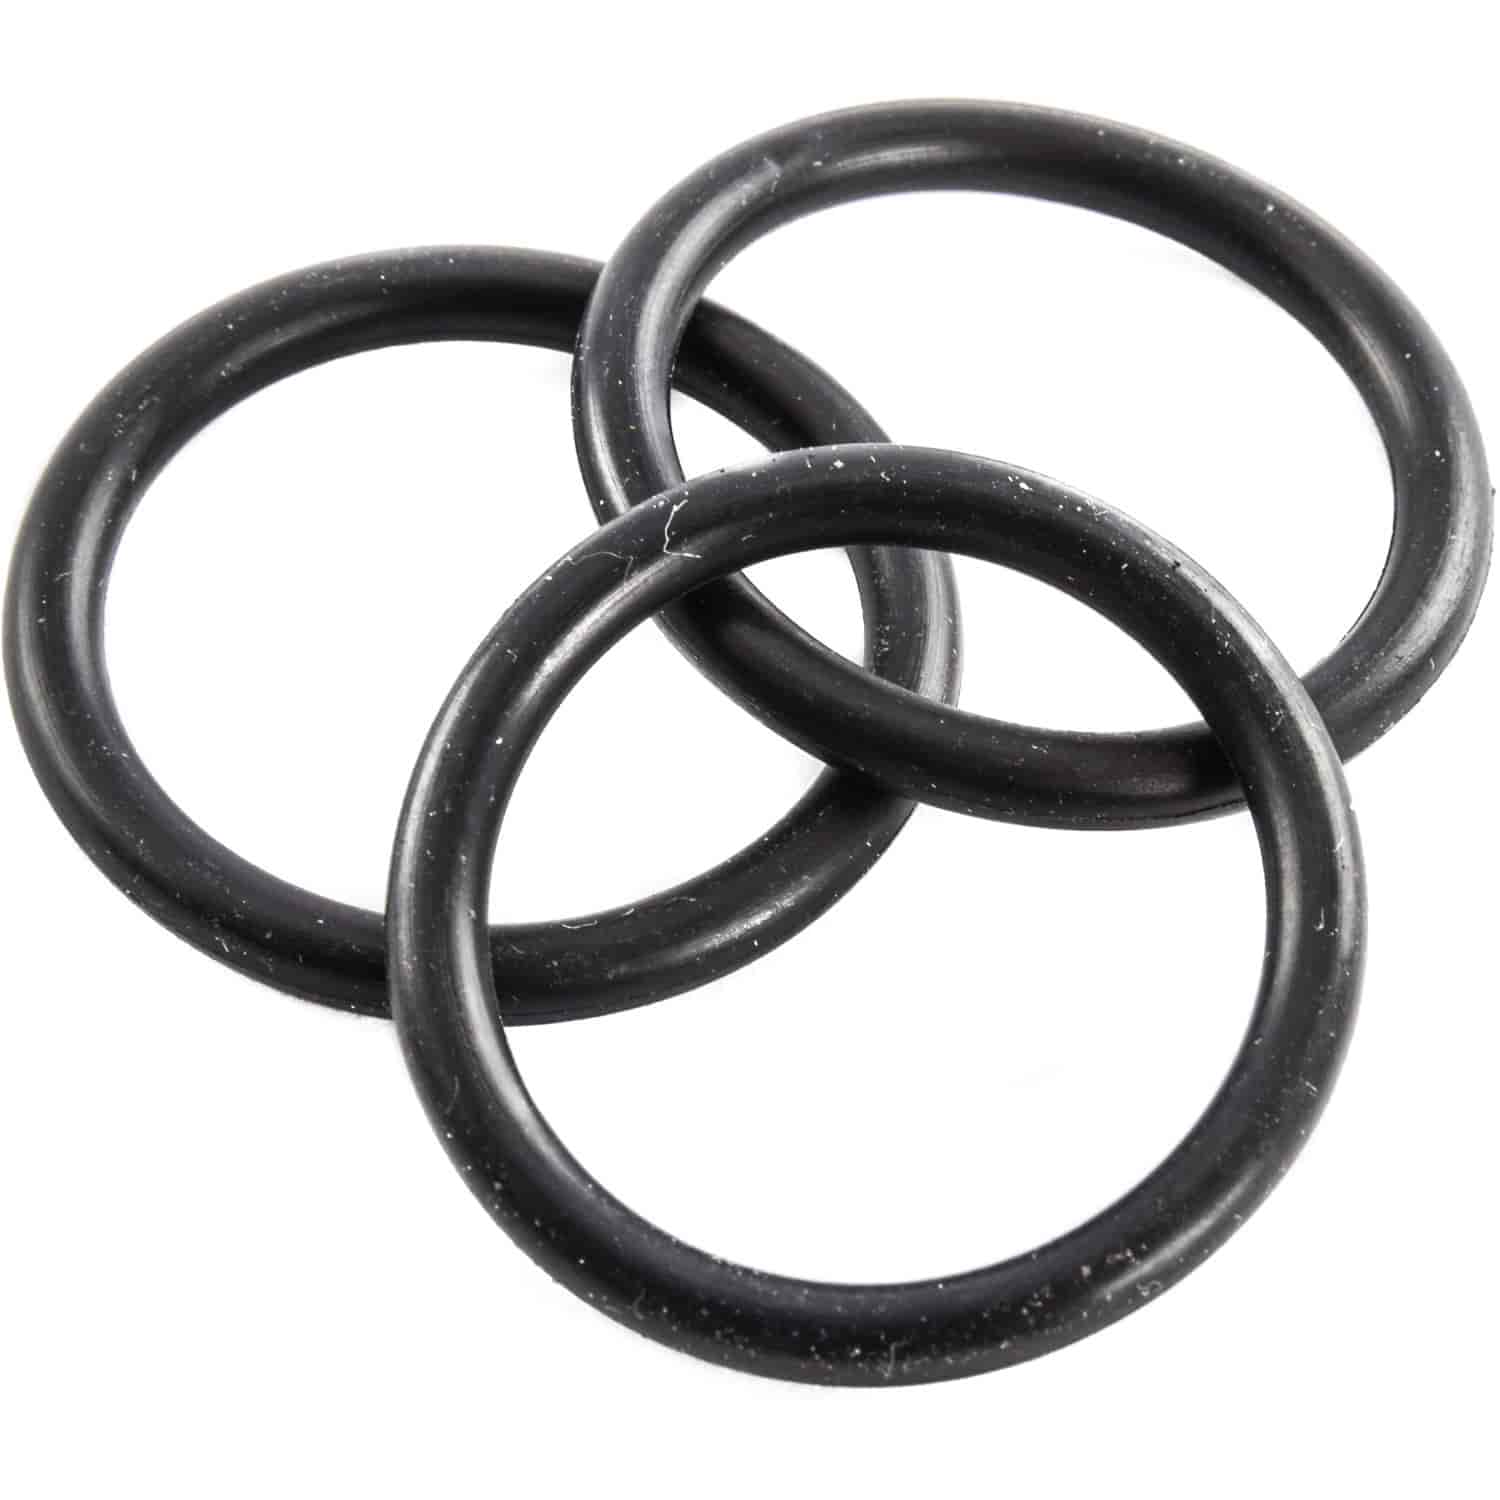 Replacement O-Rings [Set of 3]